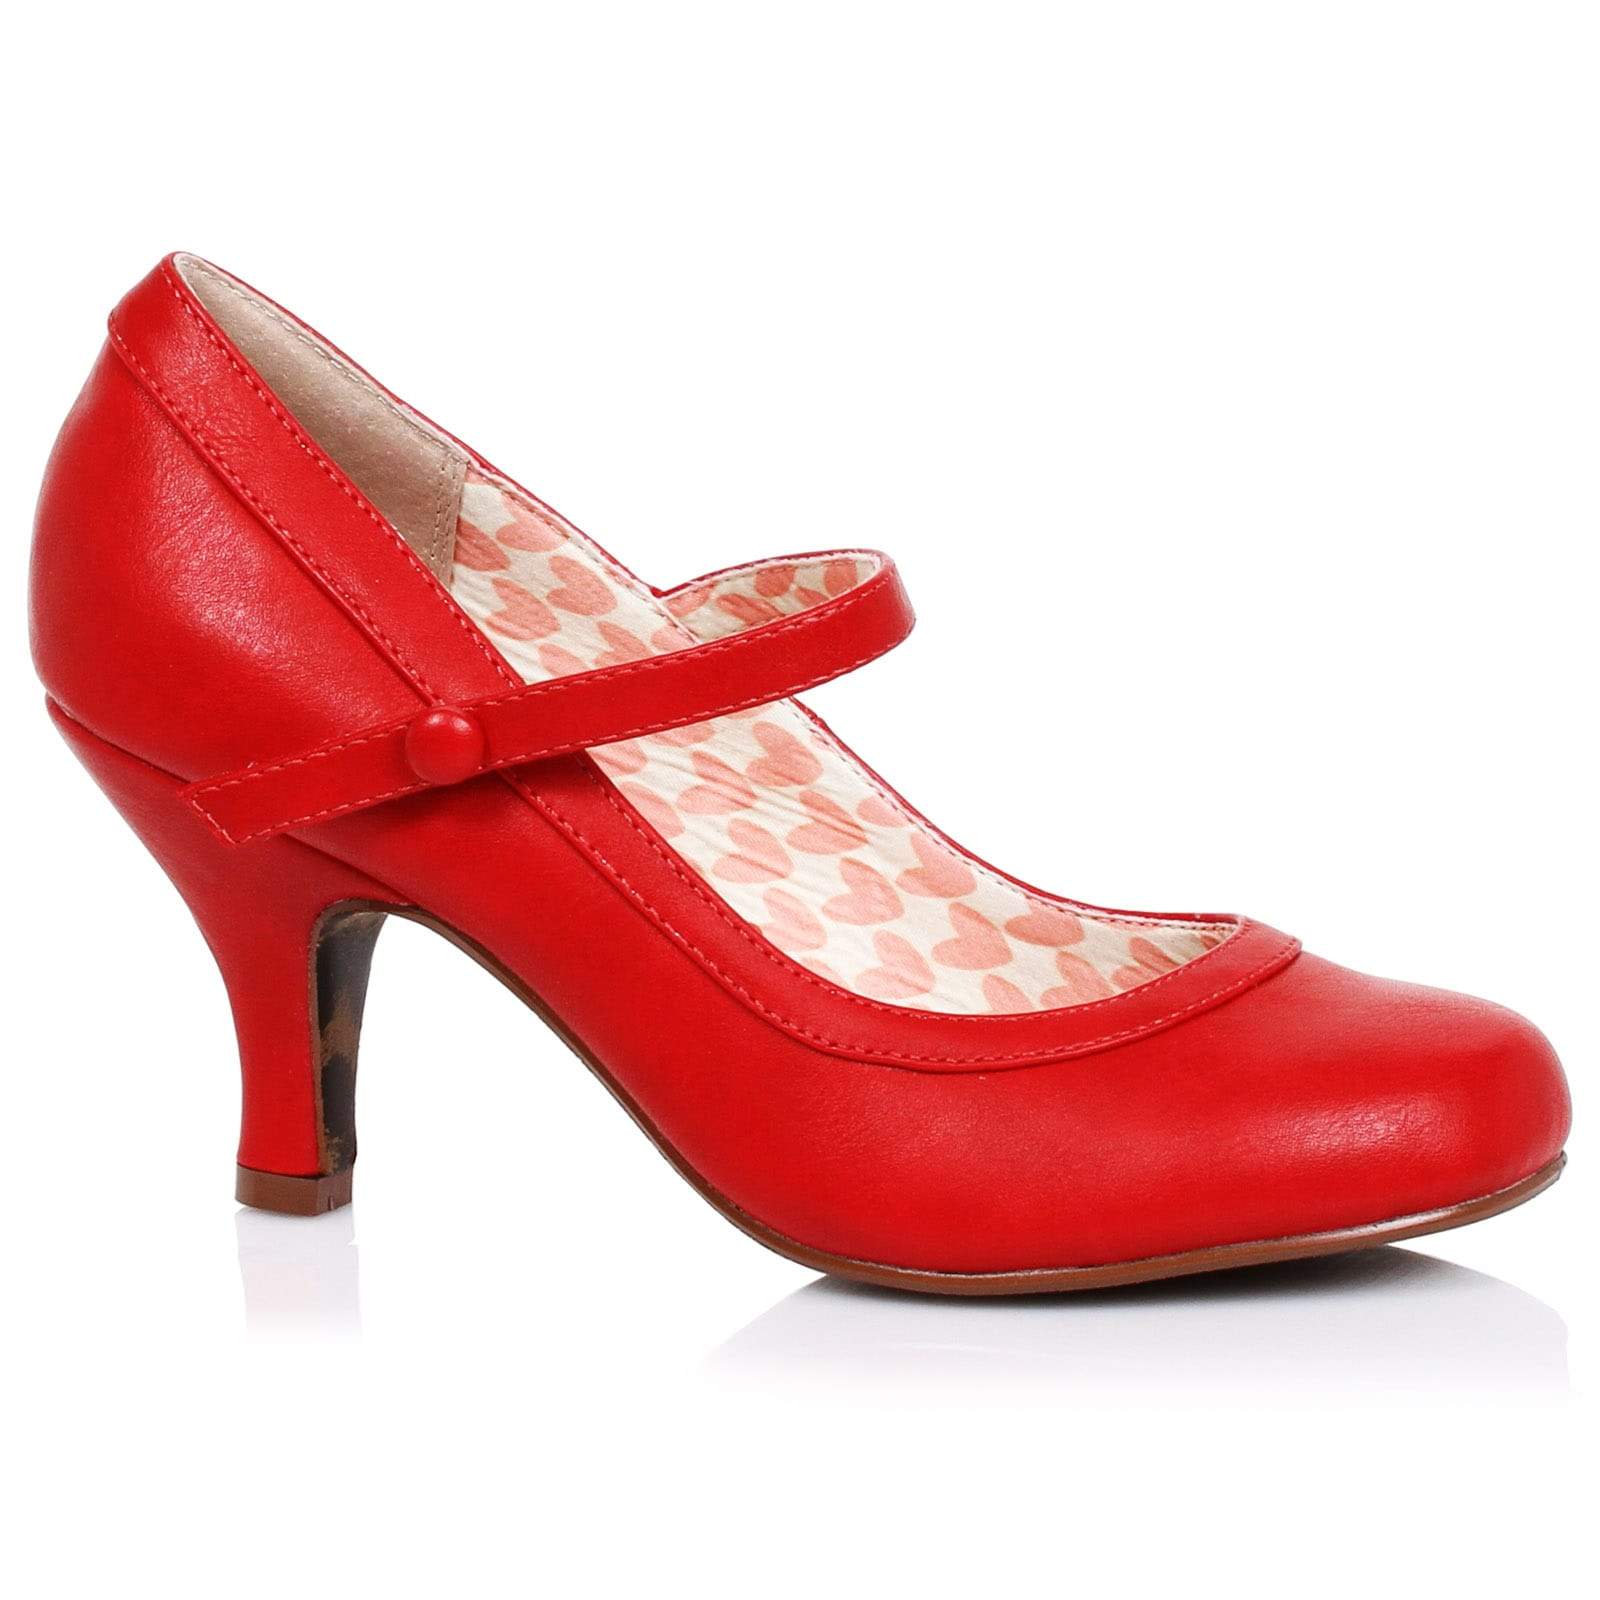 Image of Bettie Page &#039;Bettie&#039; Mary Jane Shoes - Red